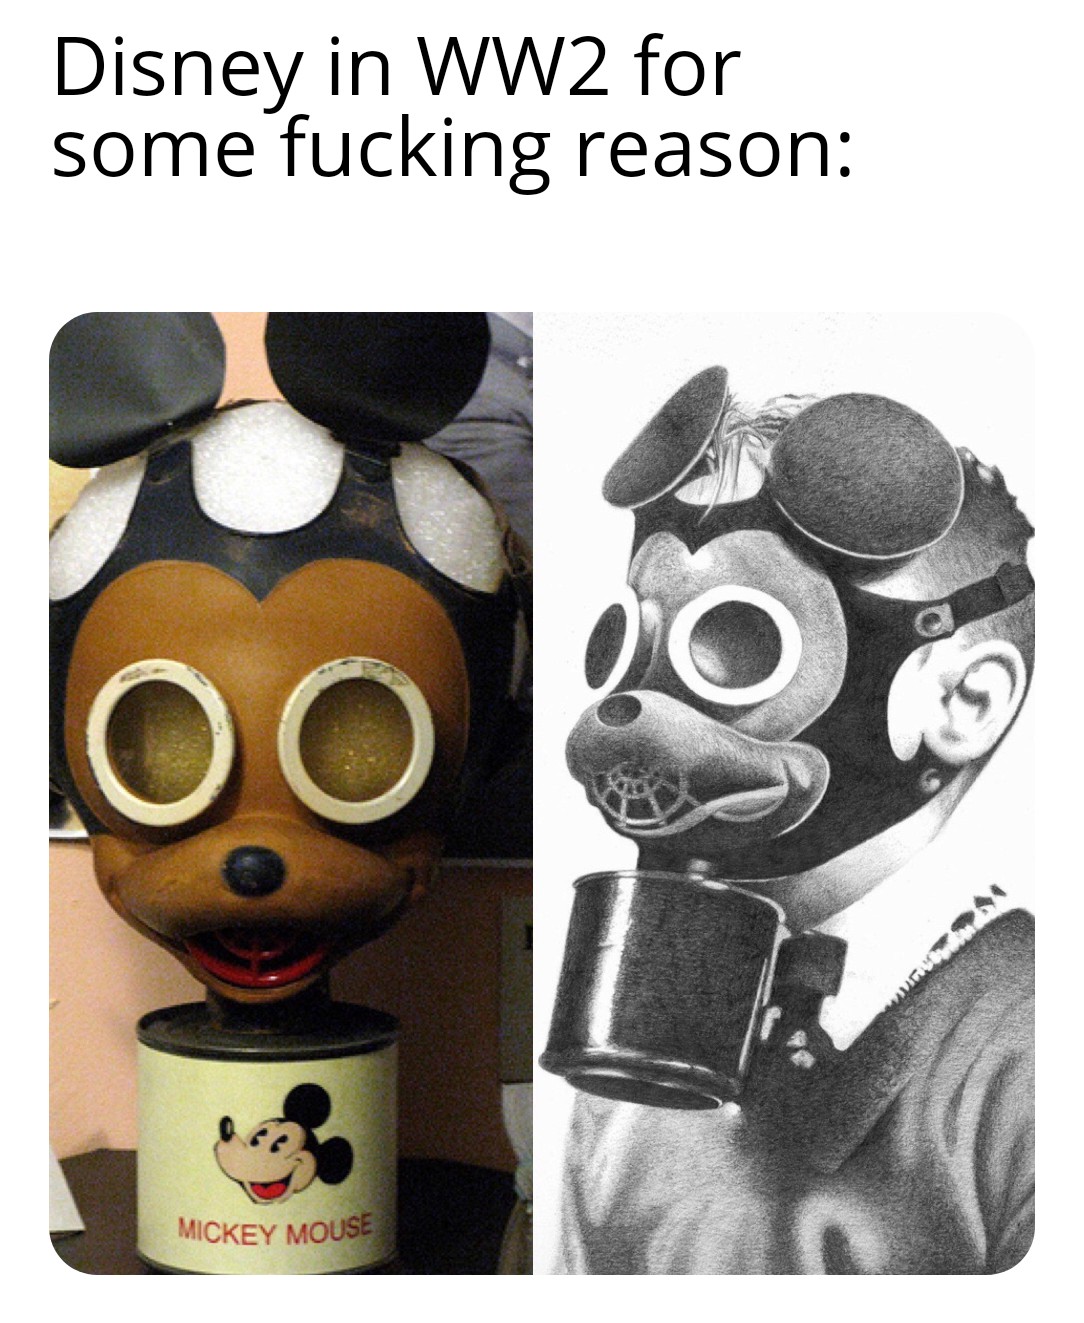 During WW2 Disney made these gas masks for children that were afraid of the regular gas masks to wear.